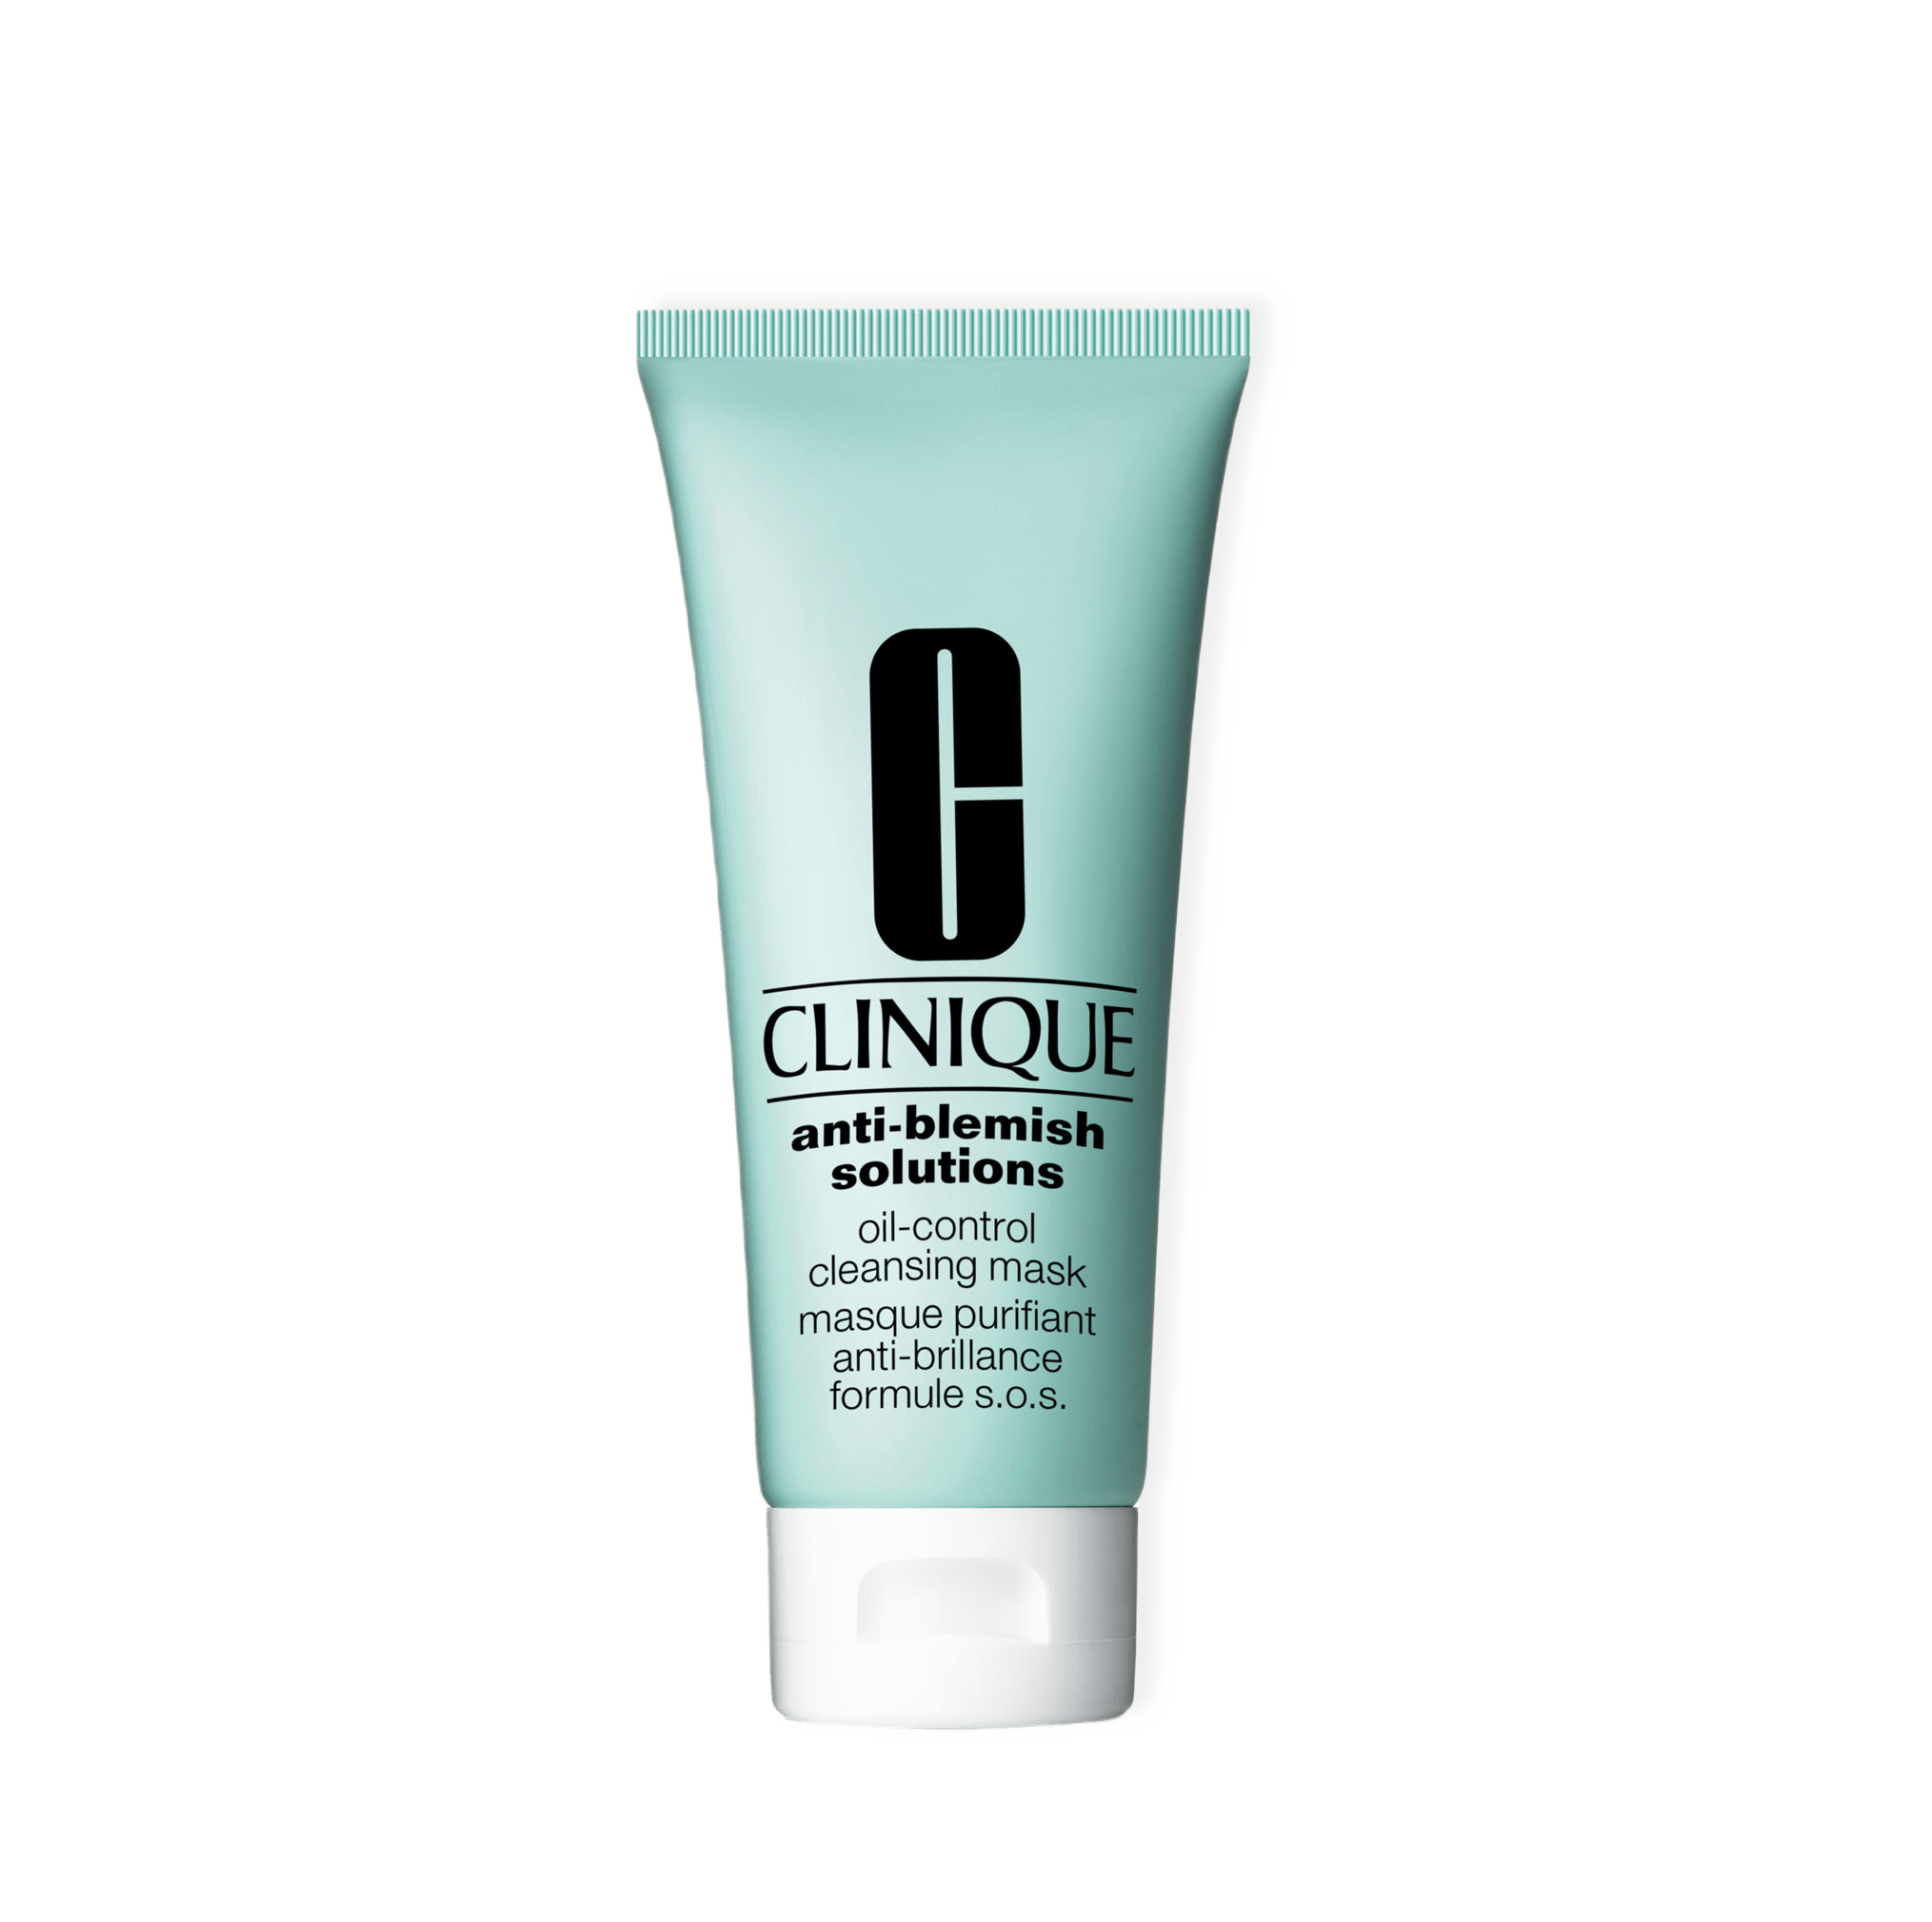 Anti-Blemish Solutions Oil-Control Cleansing Mask från Clinique